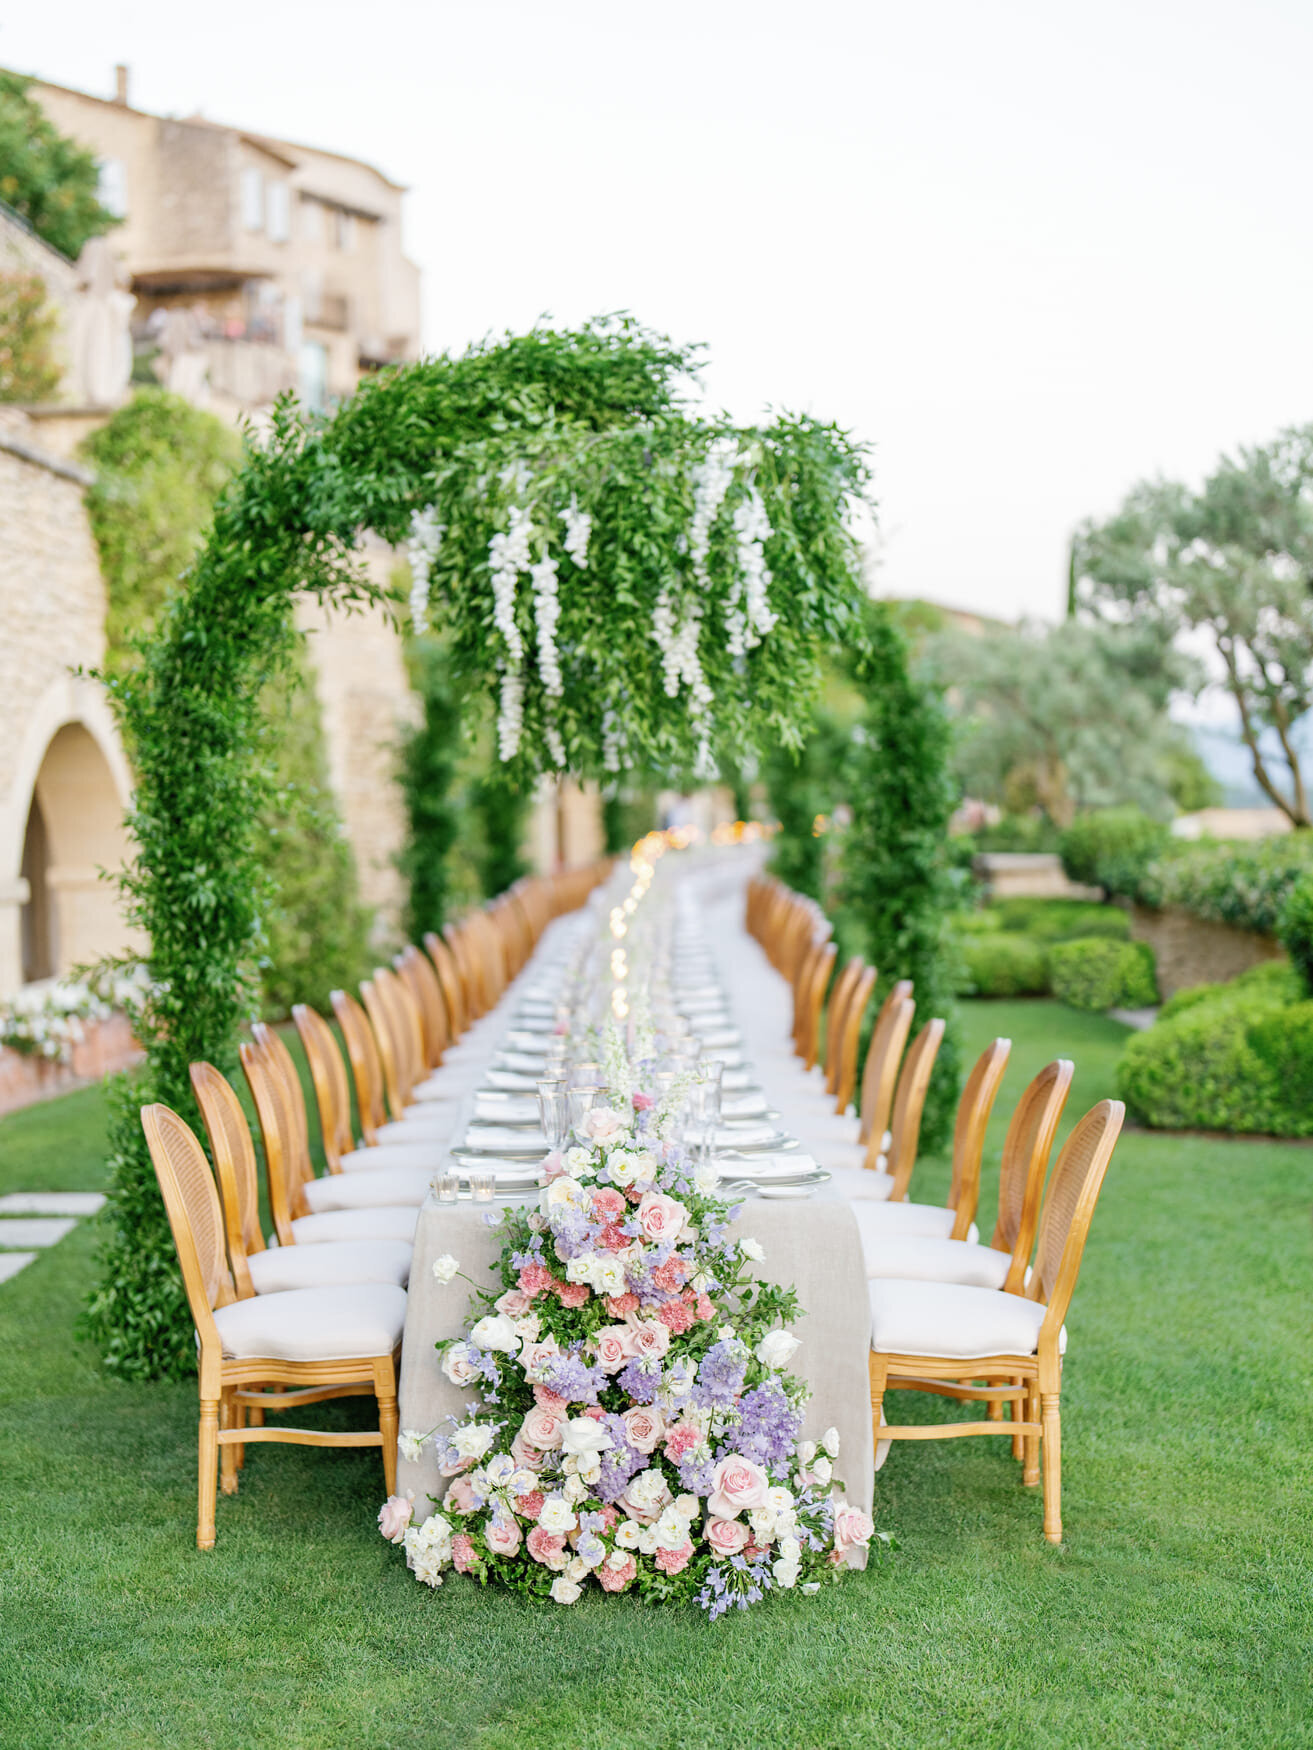 simple and-chic-garden-style-wedding-table-decoration